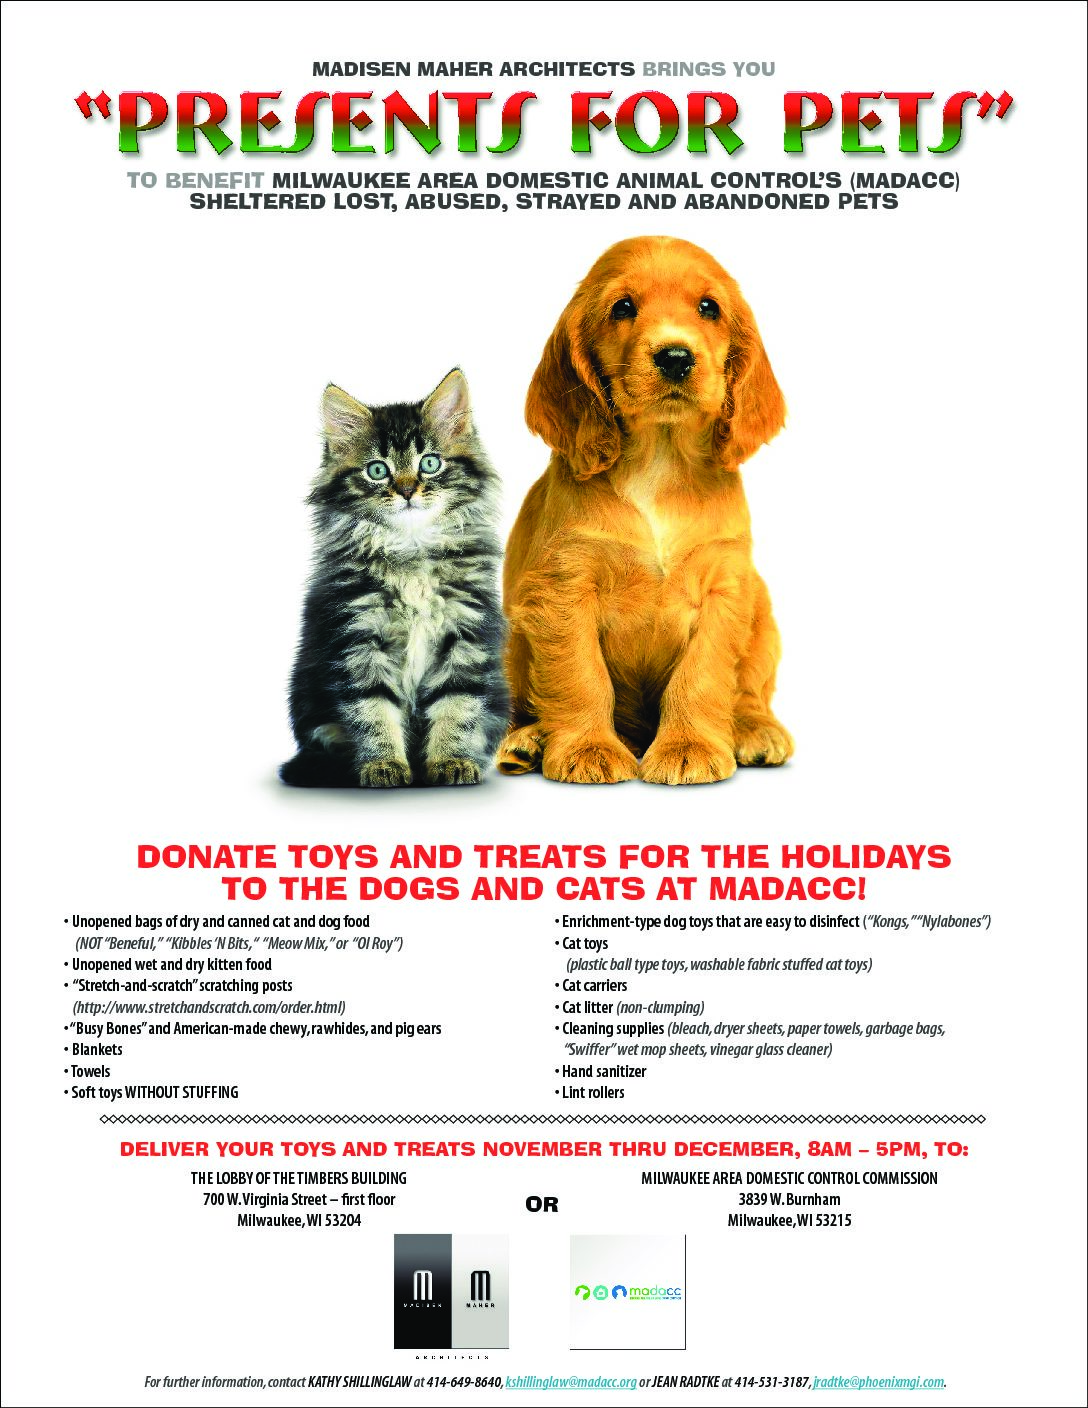 MMA brings you “Presents for Pets” to benefit MADACC